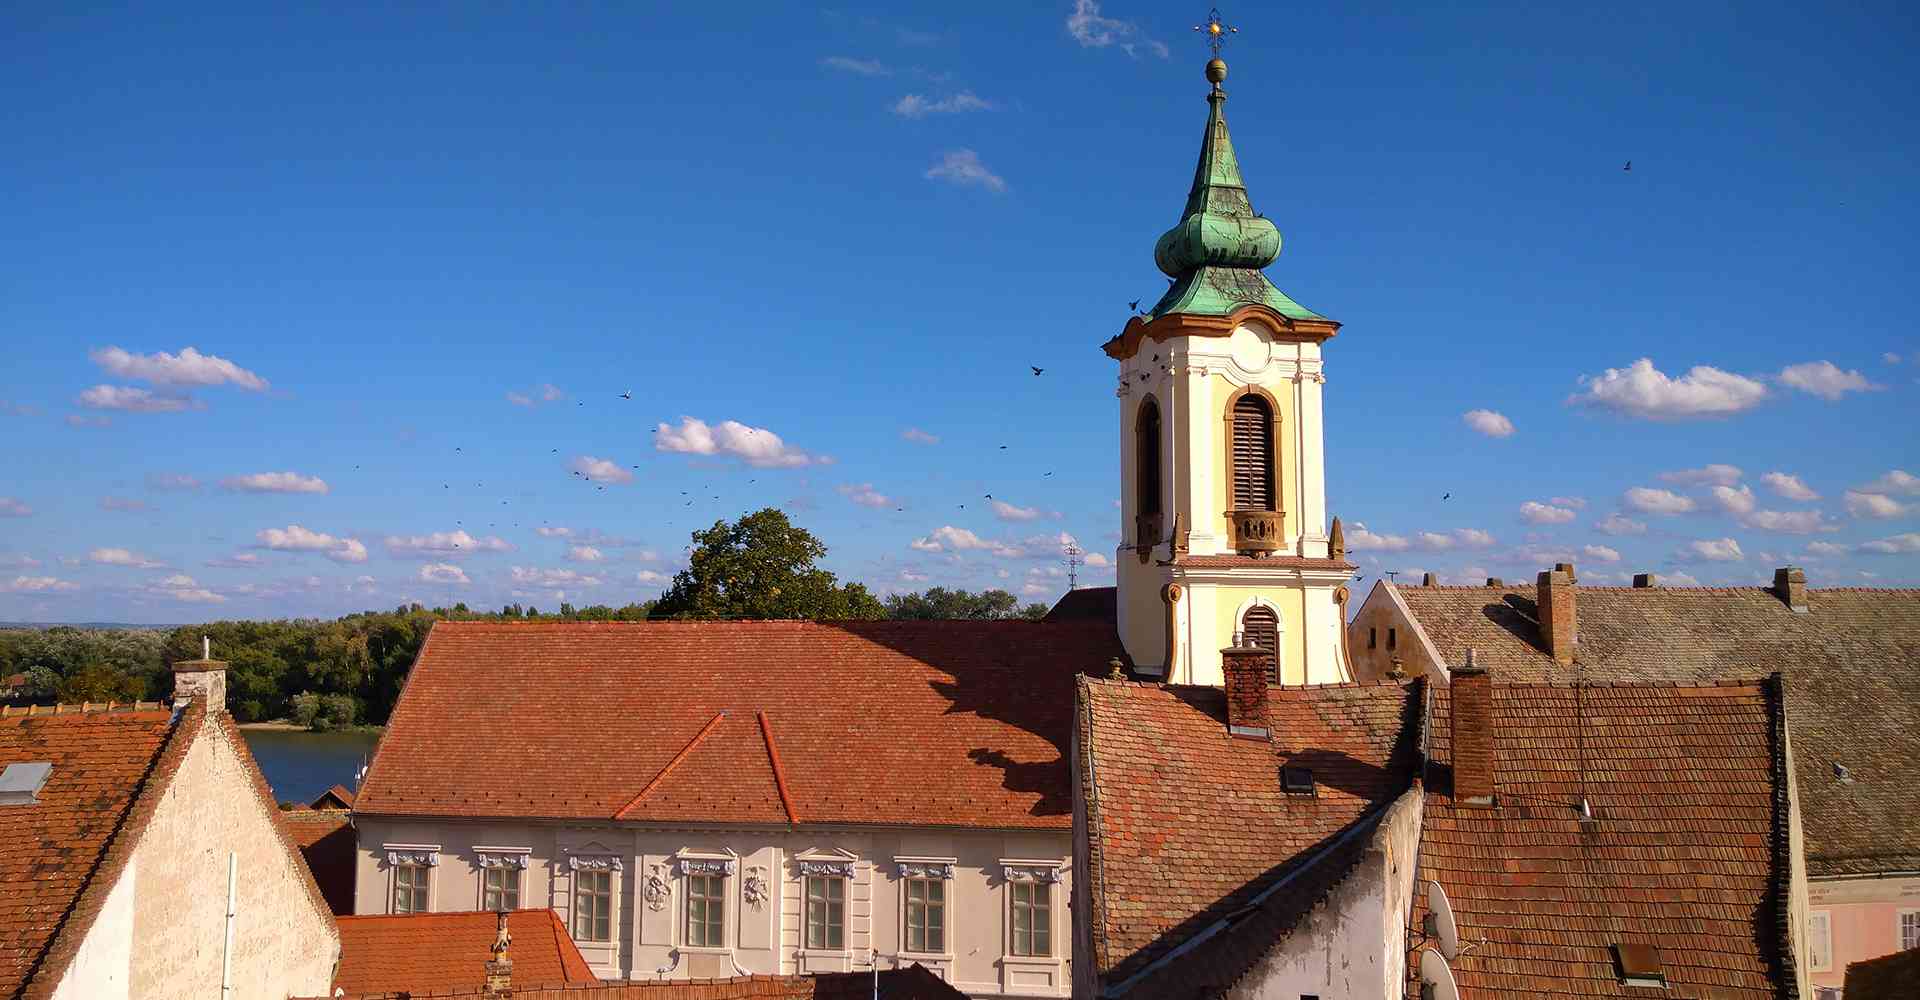 Szentendre_Őri-Art_Gallery_S9-View_of_the_Roofs